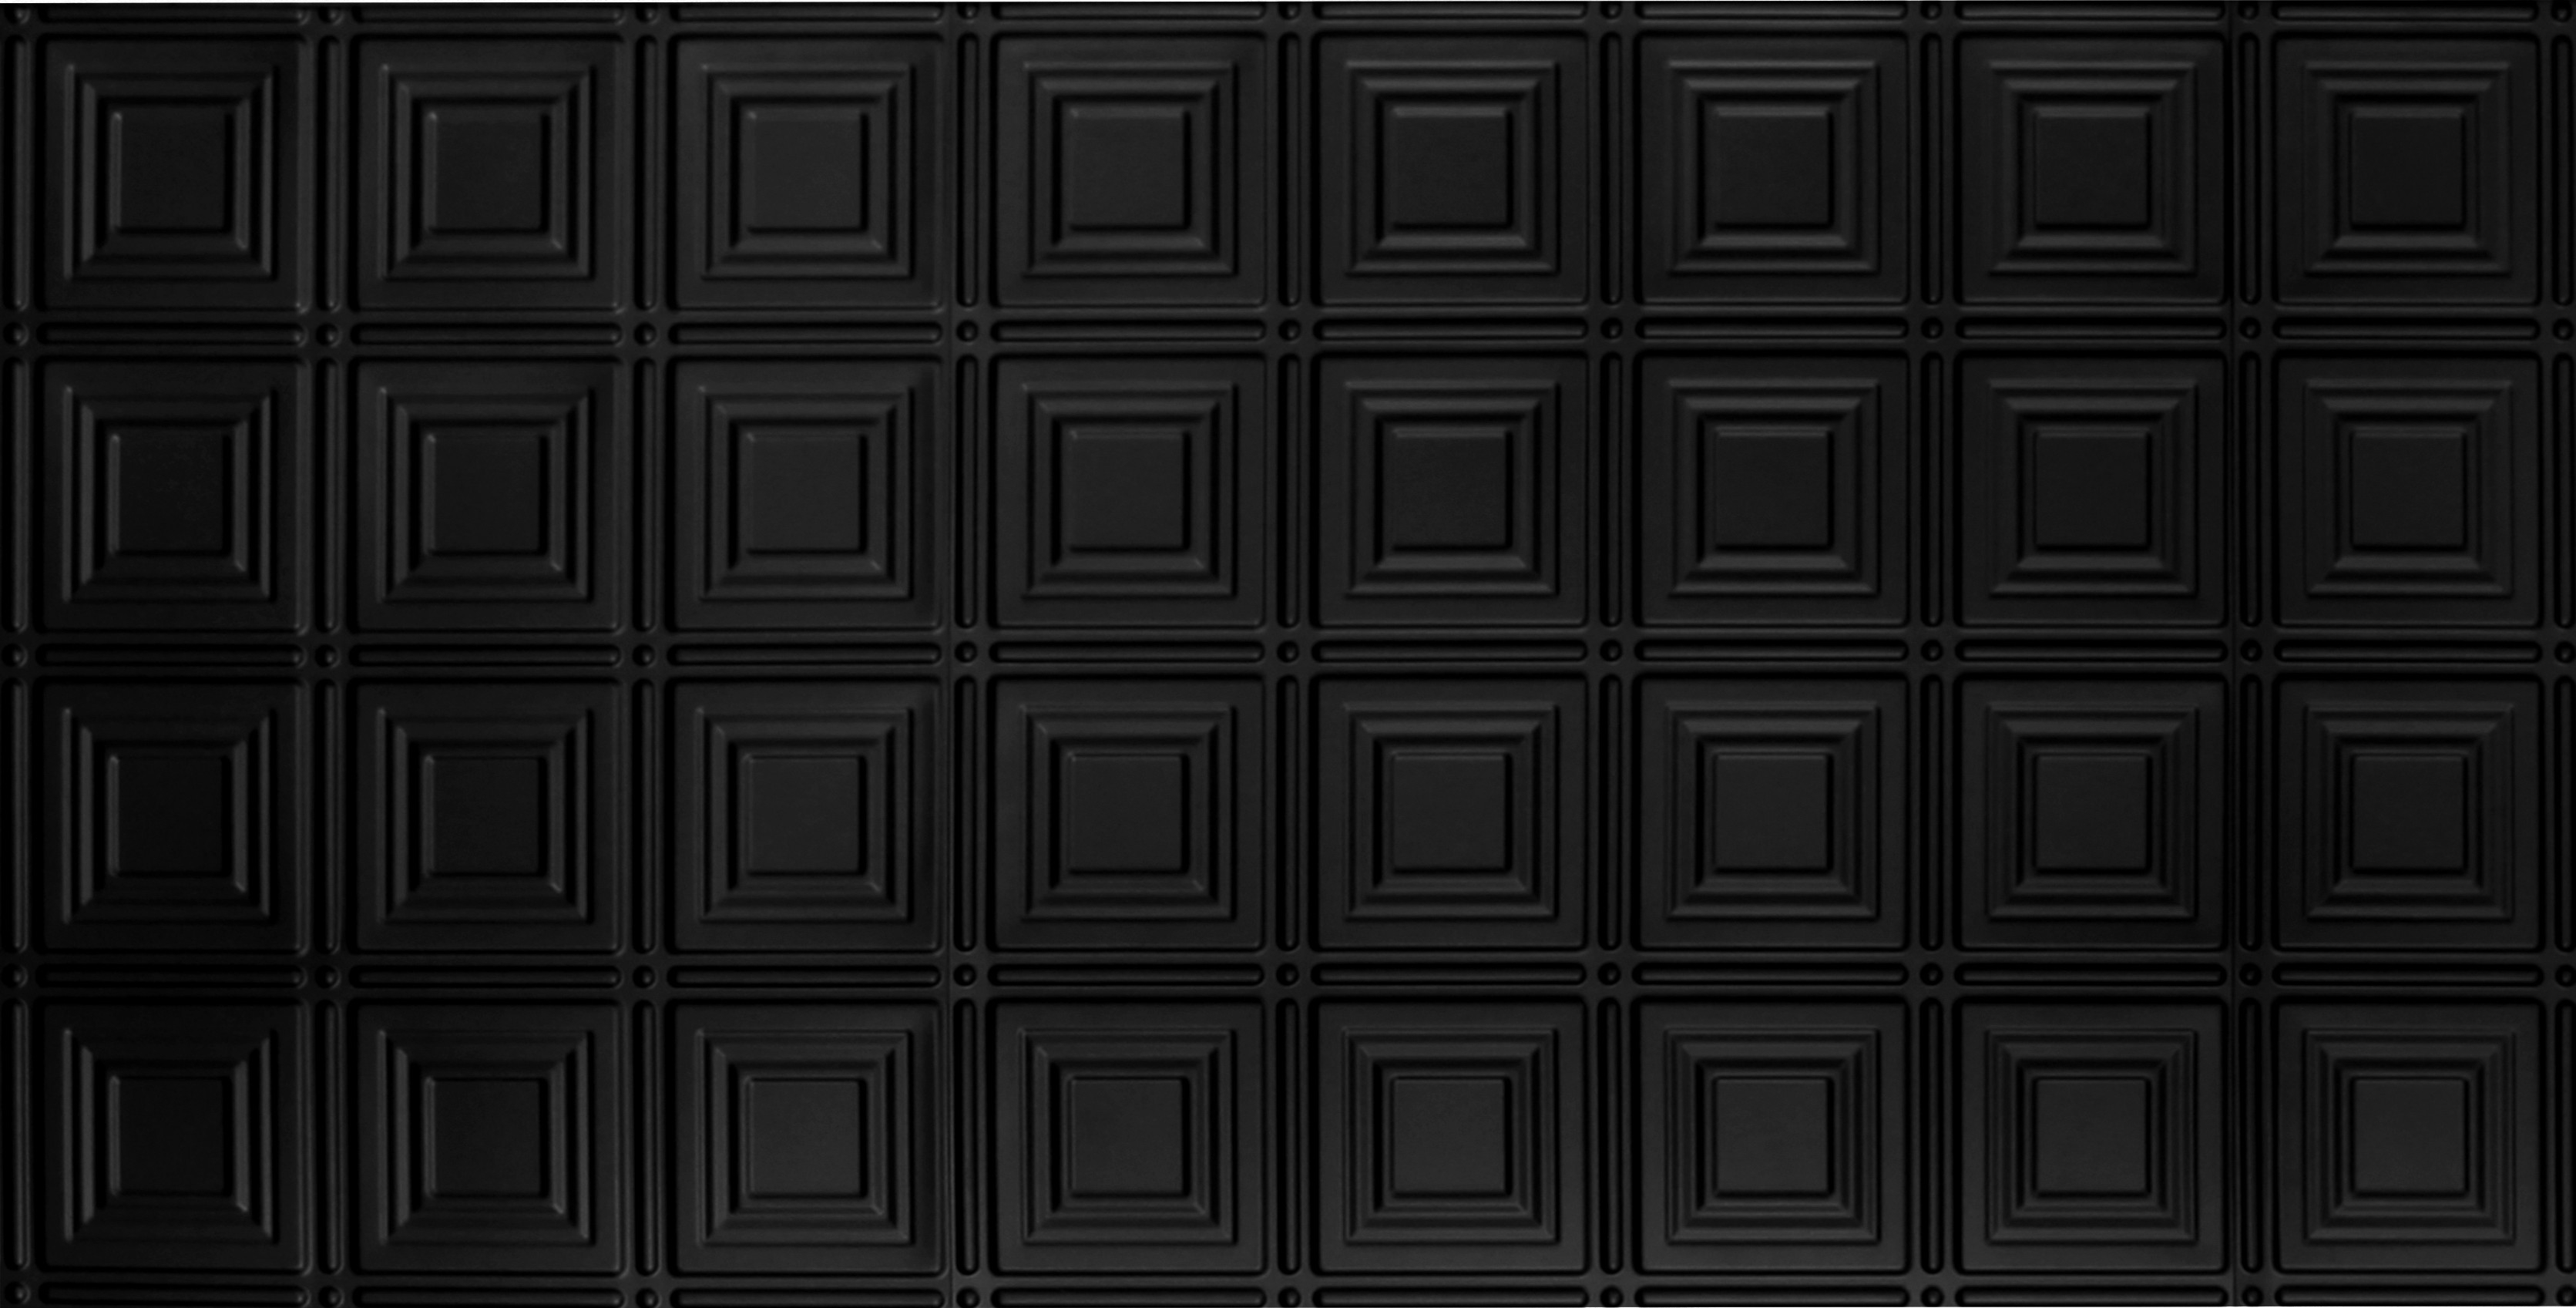 Plastic Ceiling Tiles 2x4 Plastic Ceiling Tiles 2×4 faux black 24 plastic wall and ceiling tile for home improvement 3343 X 1697